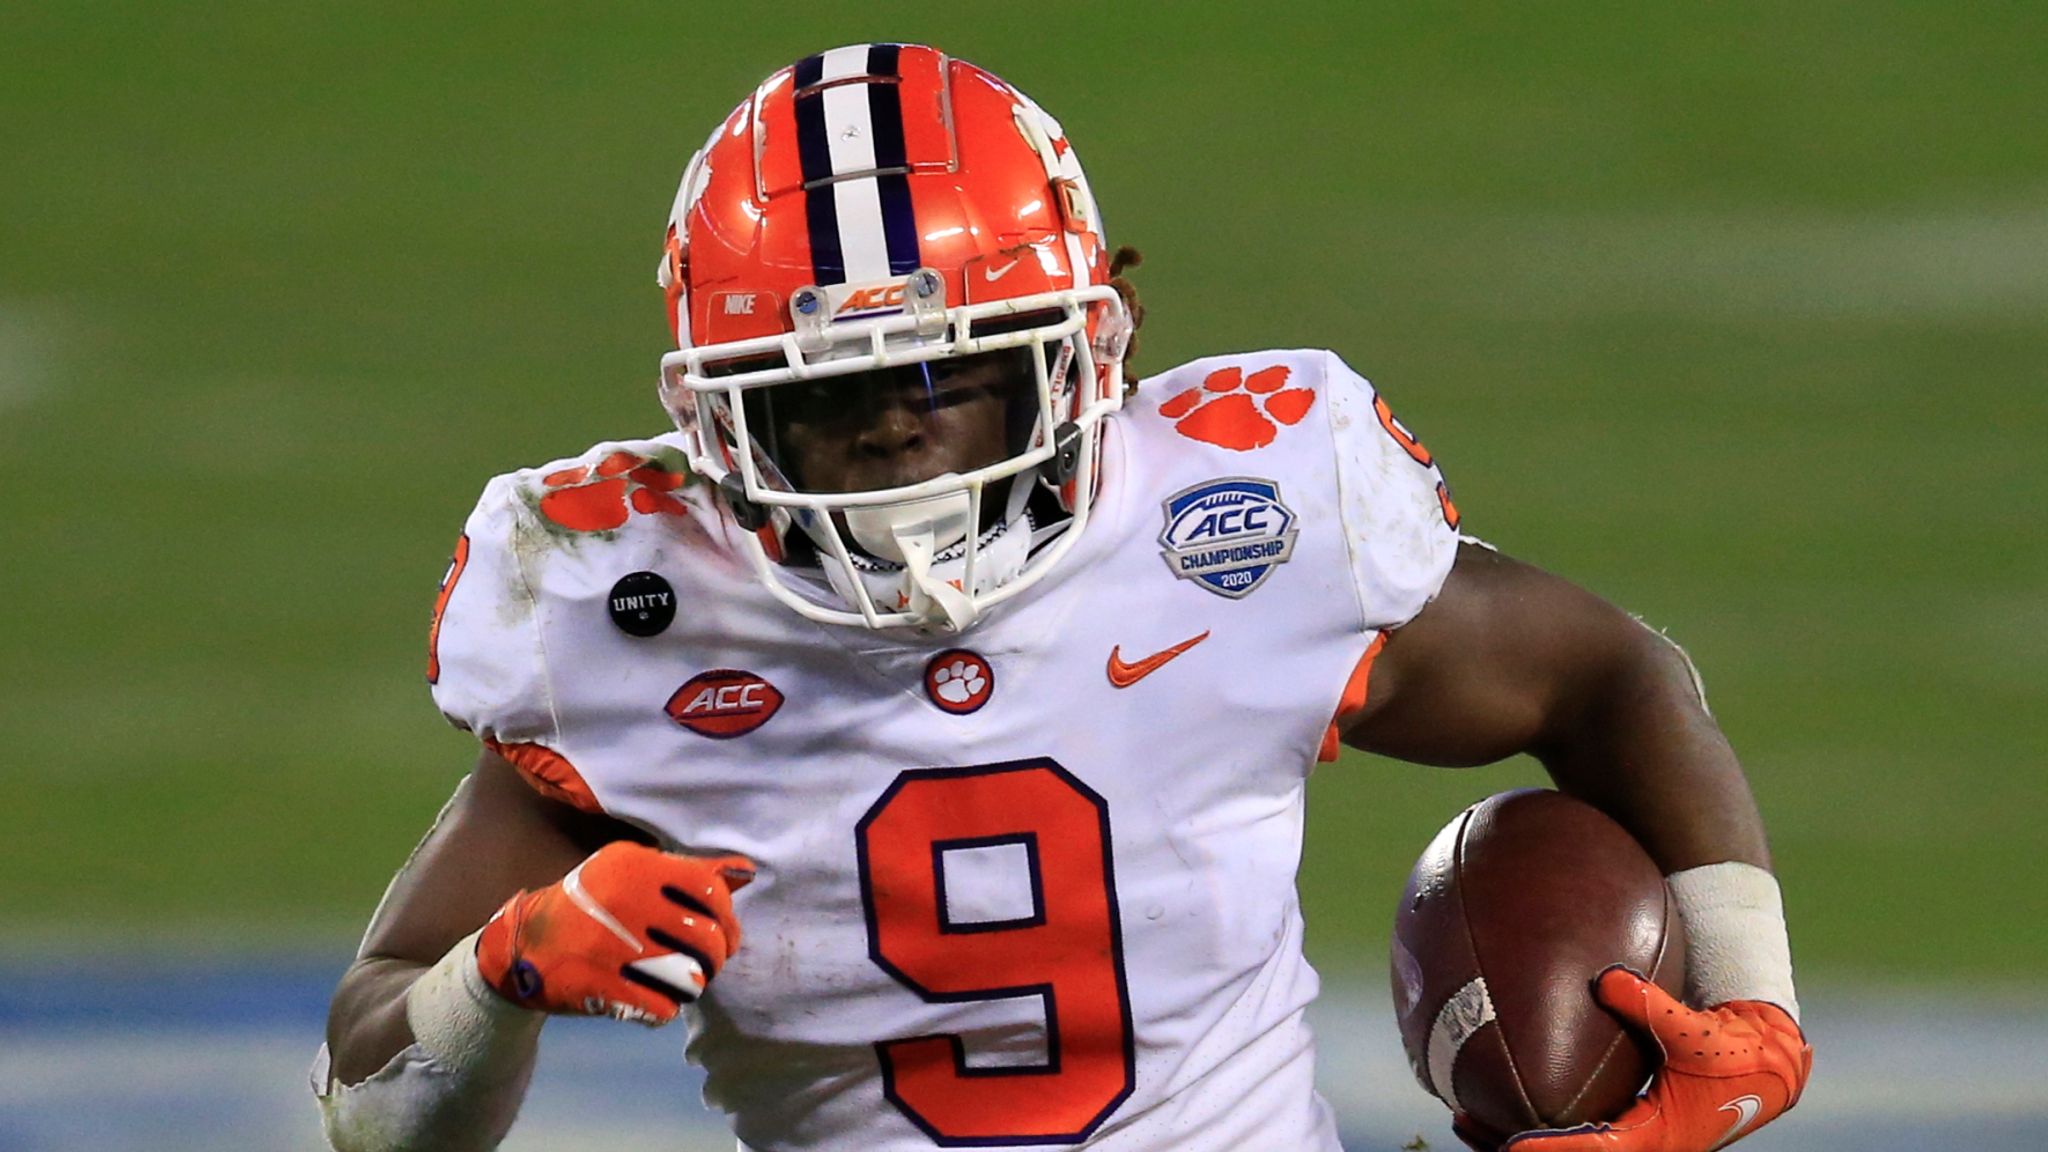 Travis etienne set for percy harvin role with jacksonville jaguars says jp shadrick nfl news sky sports